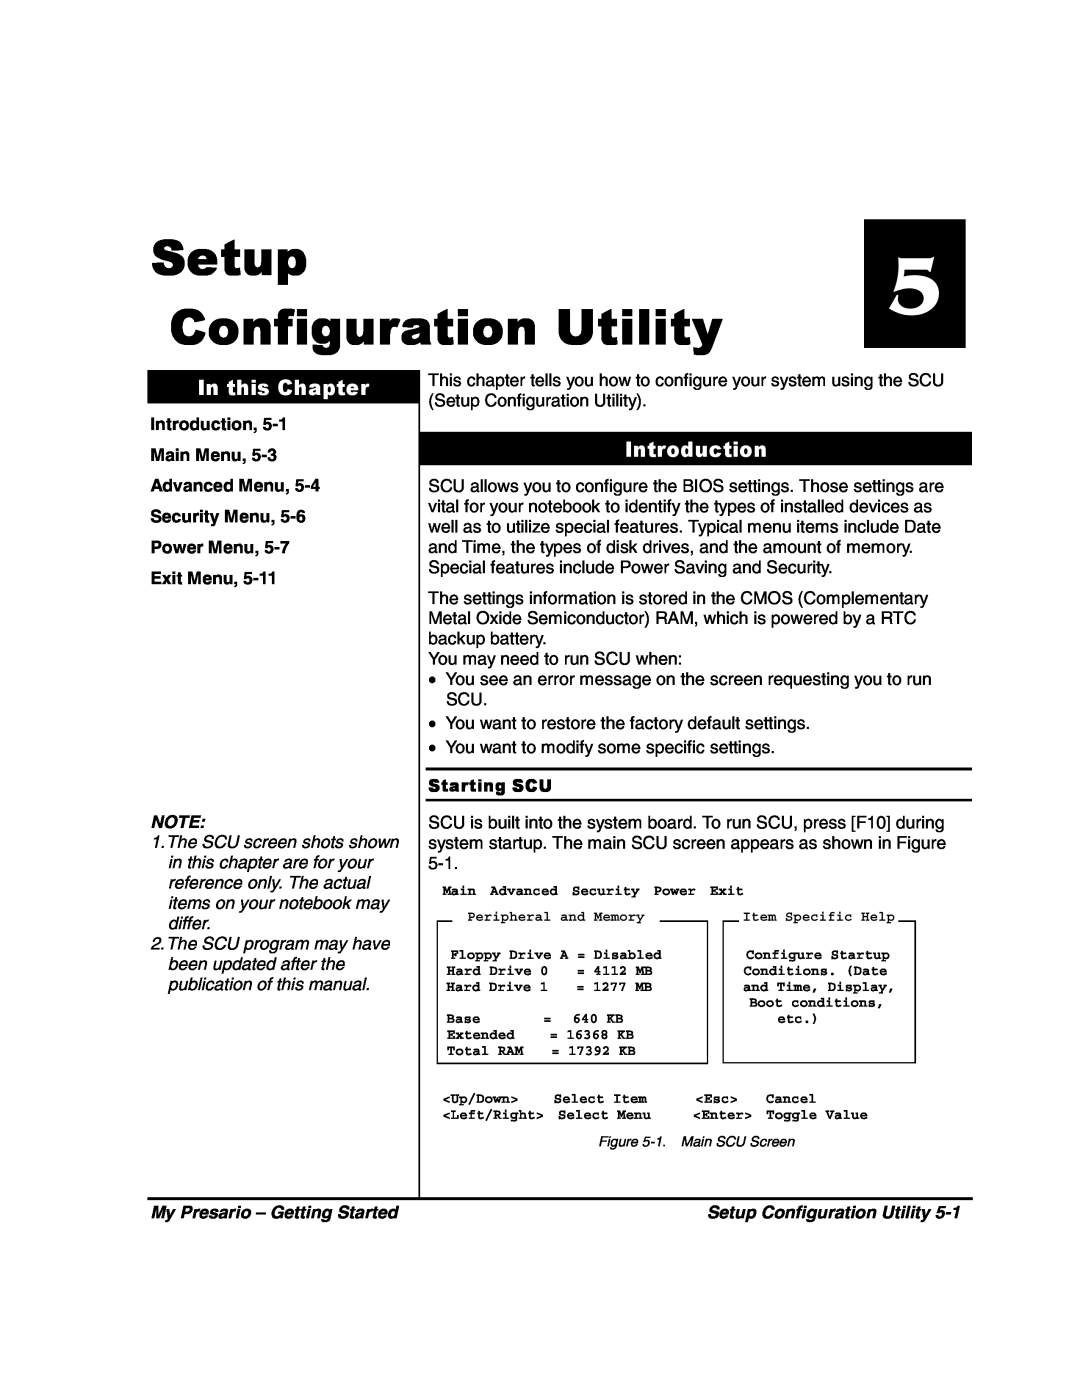 HP 80XL302 manual Setup Configuration Utility, Introduction, In this Chapter, Exit Menu, Starting SCU 